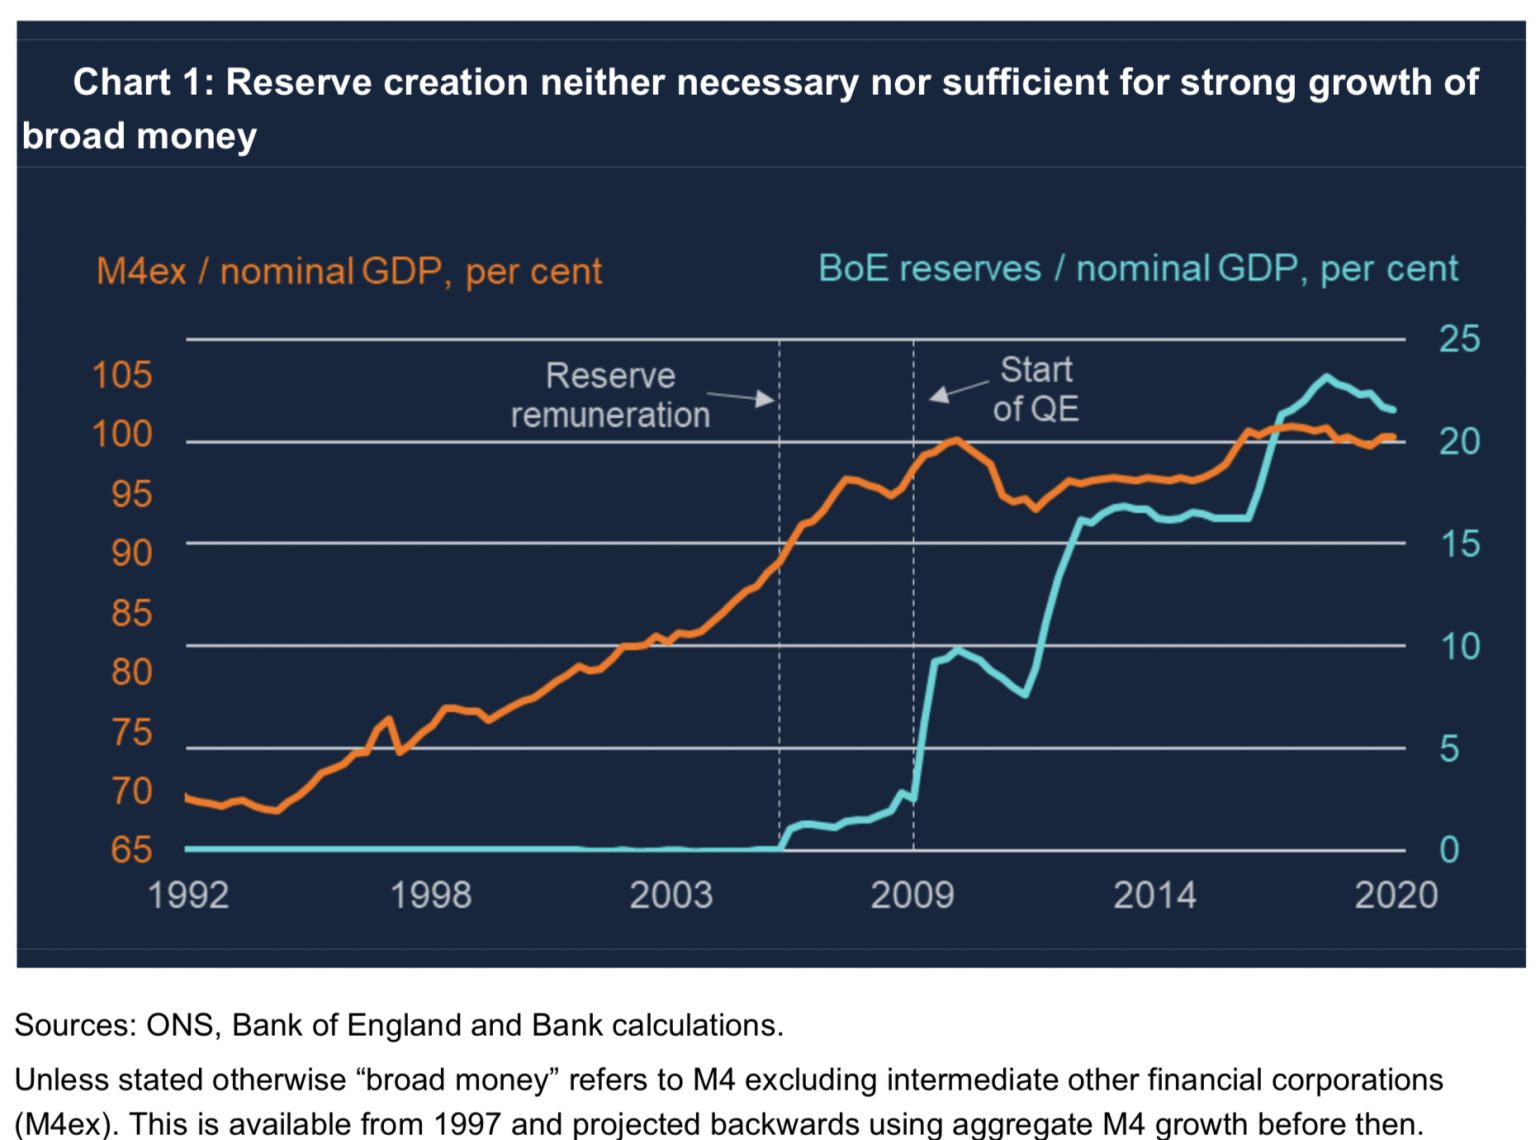 Quantitative easing did not cause inflation now shall we move on from